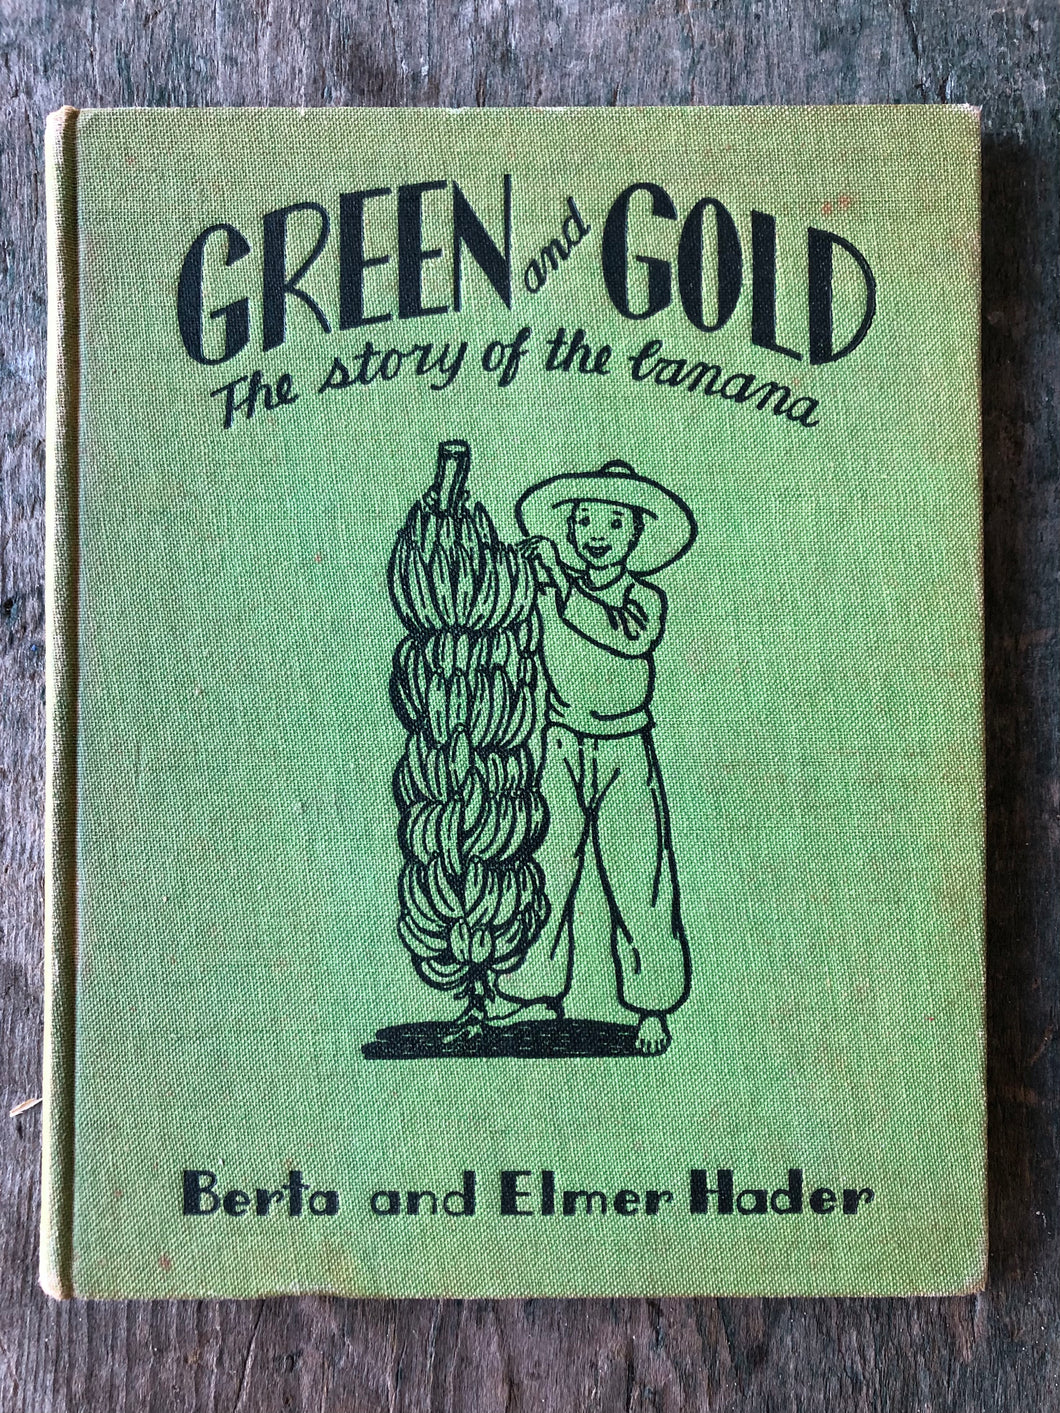 Green and Gold: The Story of the Banana by Berta and Elmer Hader